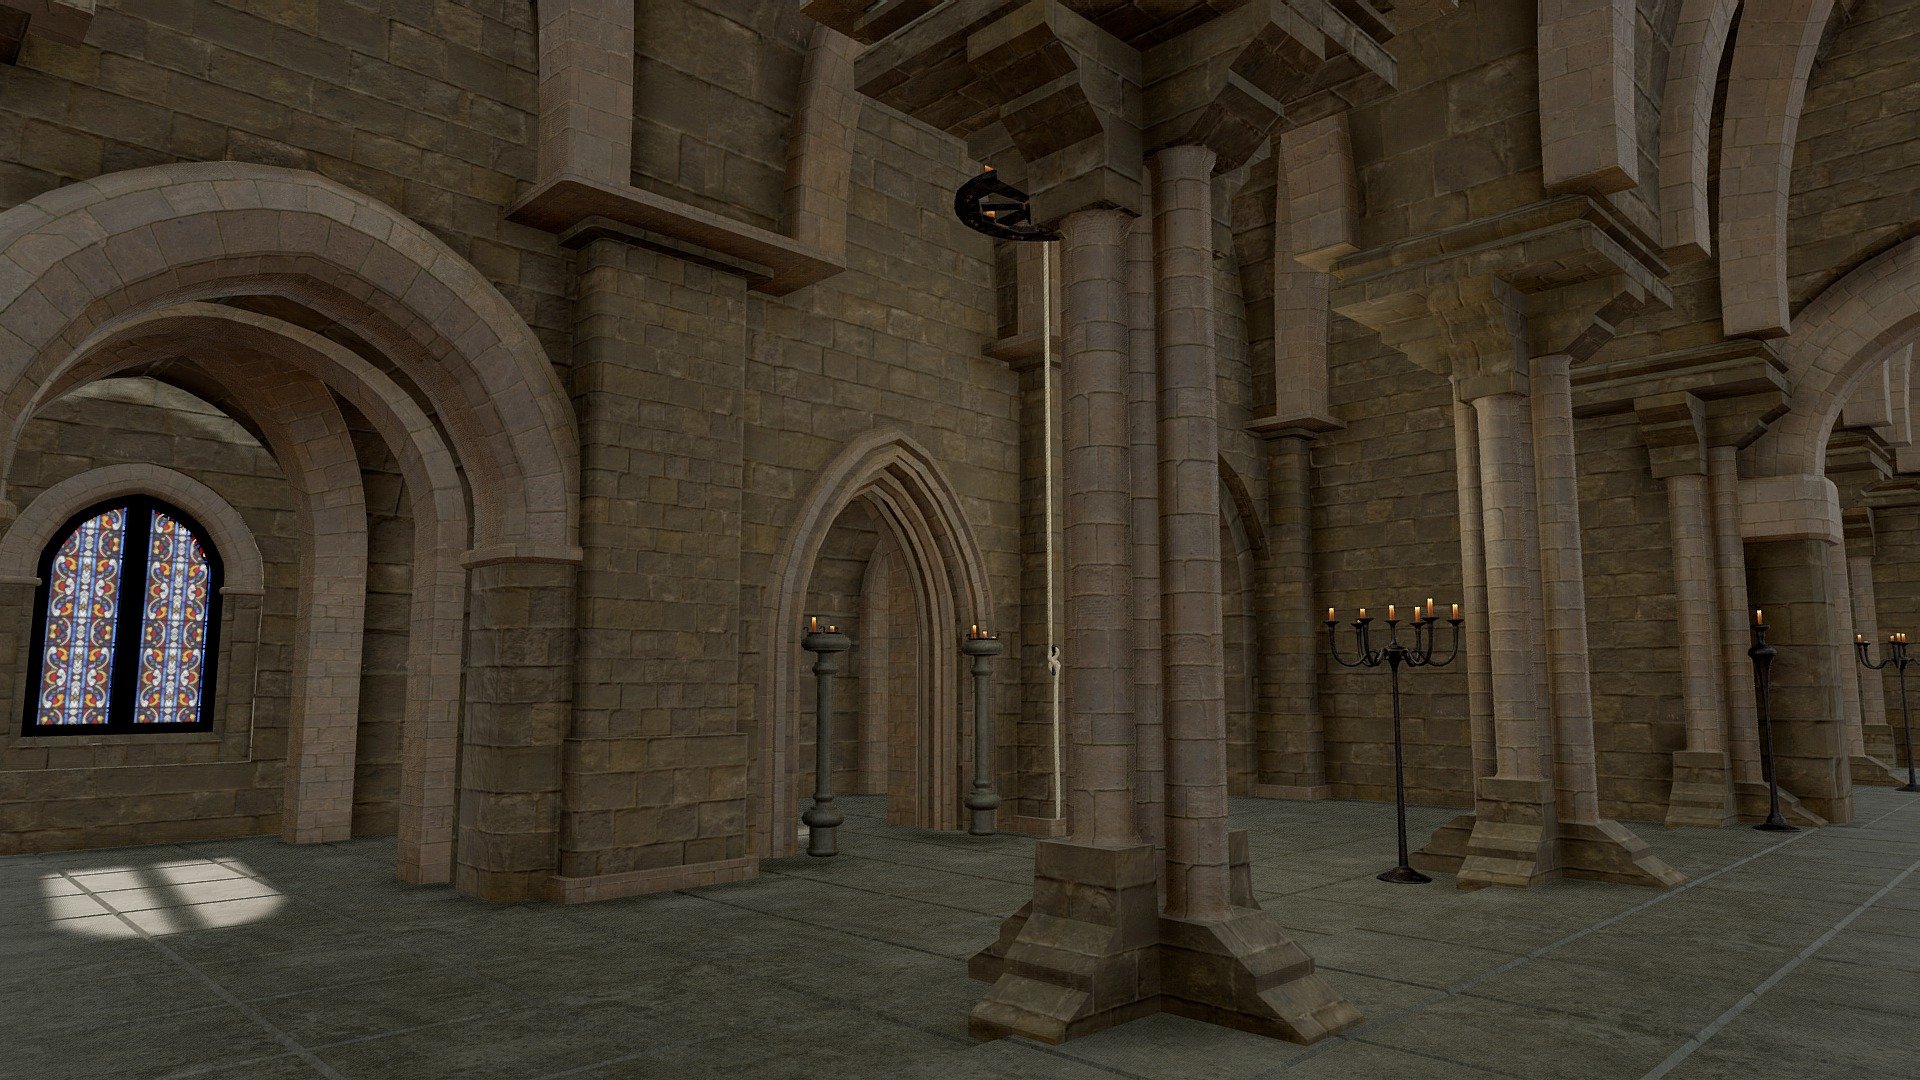 Set of modular pieces setup to create various medieval and dungeon scenes.
Includes UE5 Zip project file.
Everything is setup to snap easily and simply rotating objects to enable very fast scene building.
Textures are tiled and can be easily swapped or customized 3d model